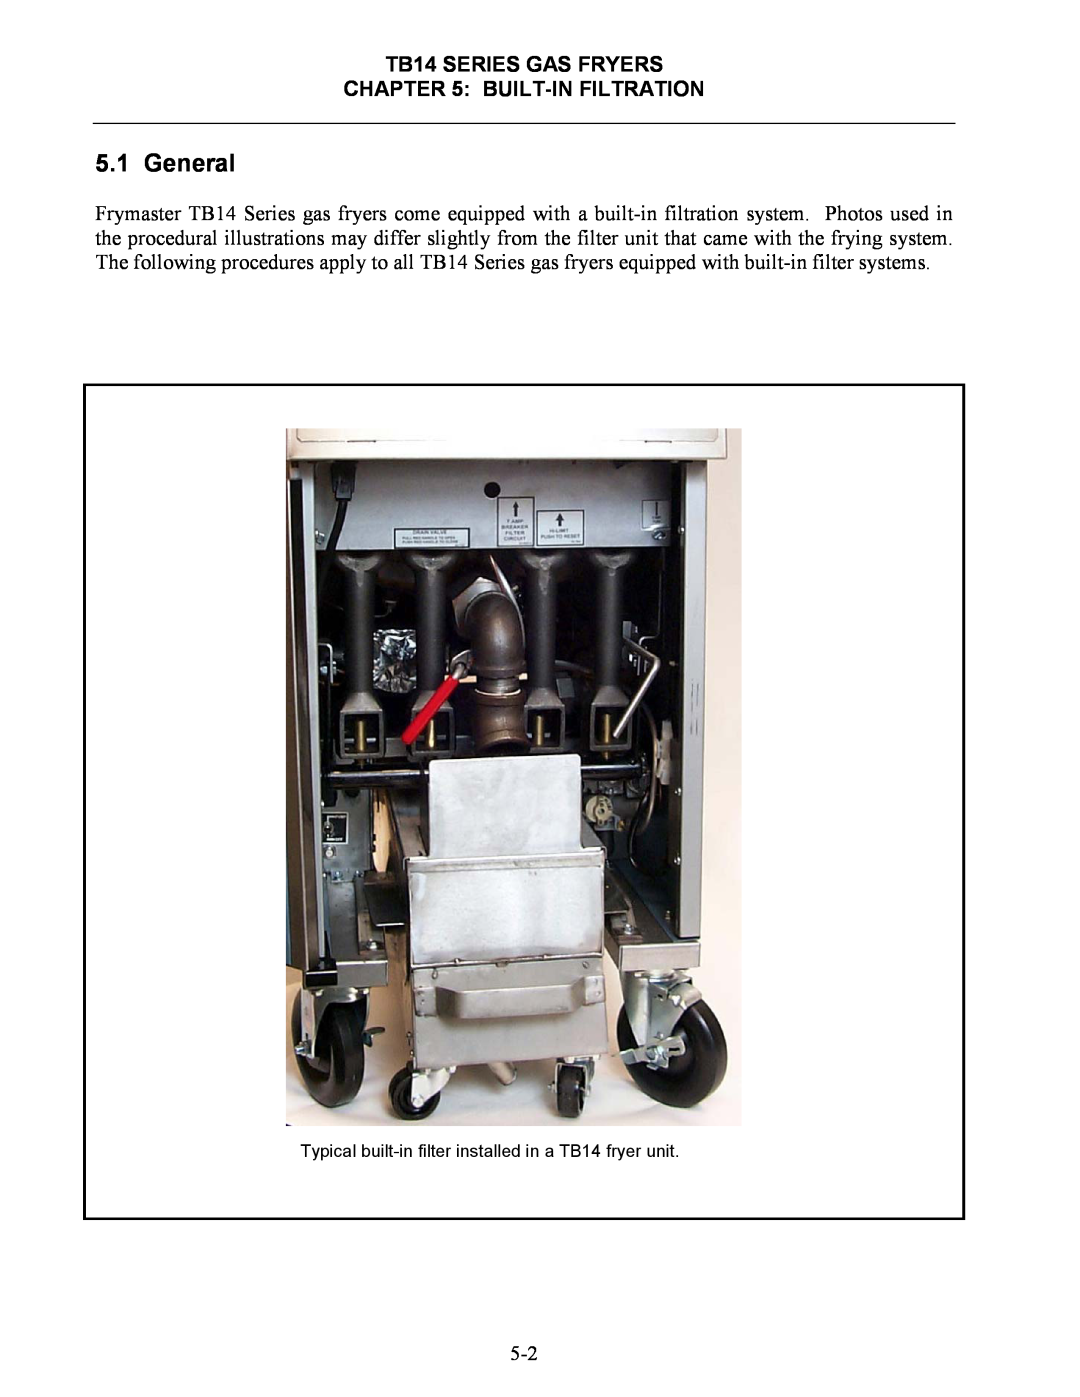 Frymaster operation manual General, TB14 SERIES GAS FRYERS BUILT-IN FILTRATION 